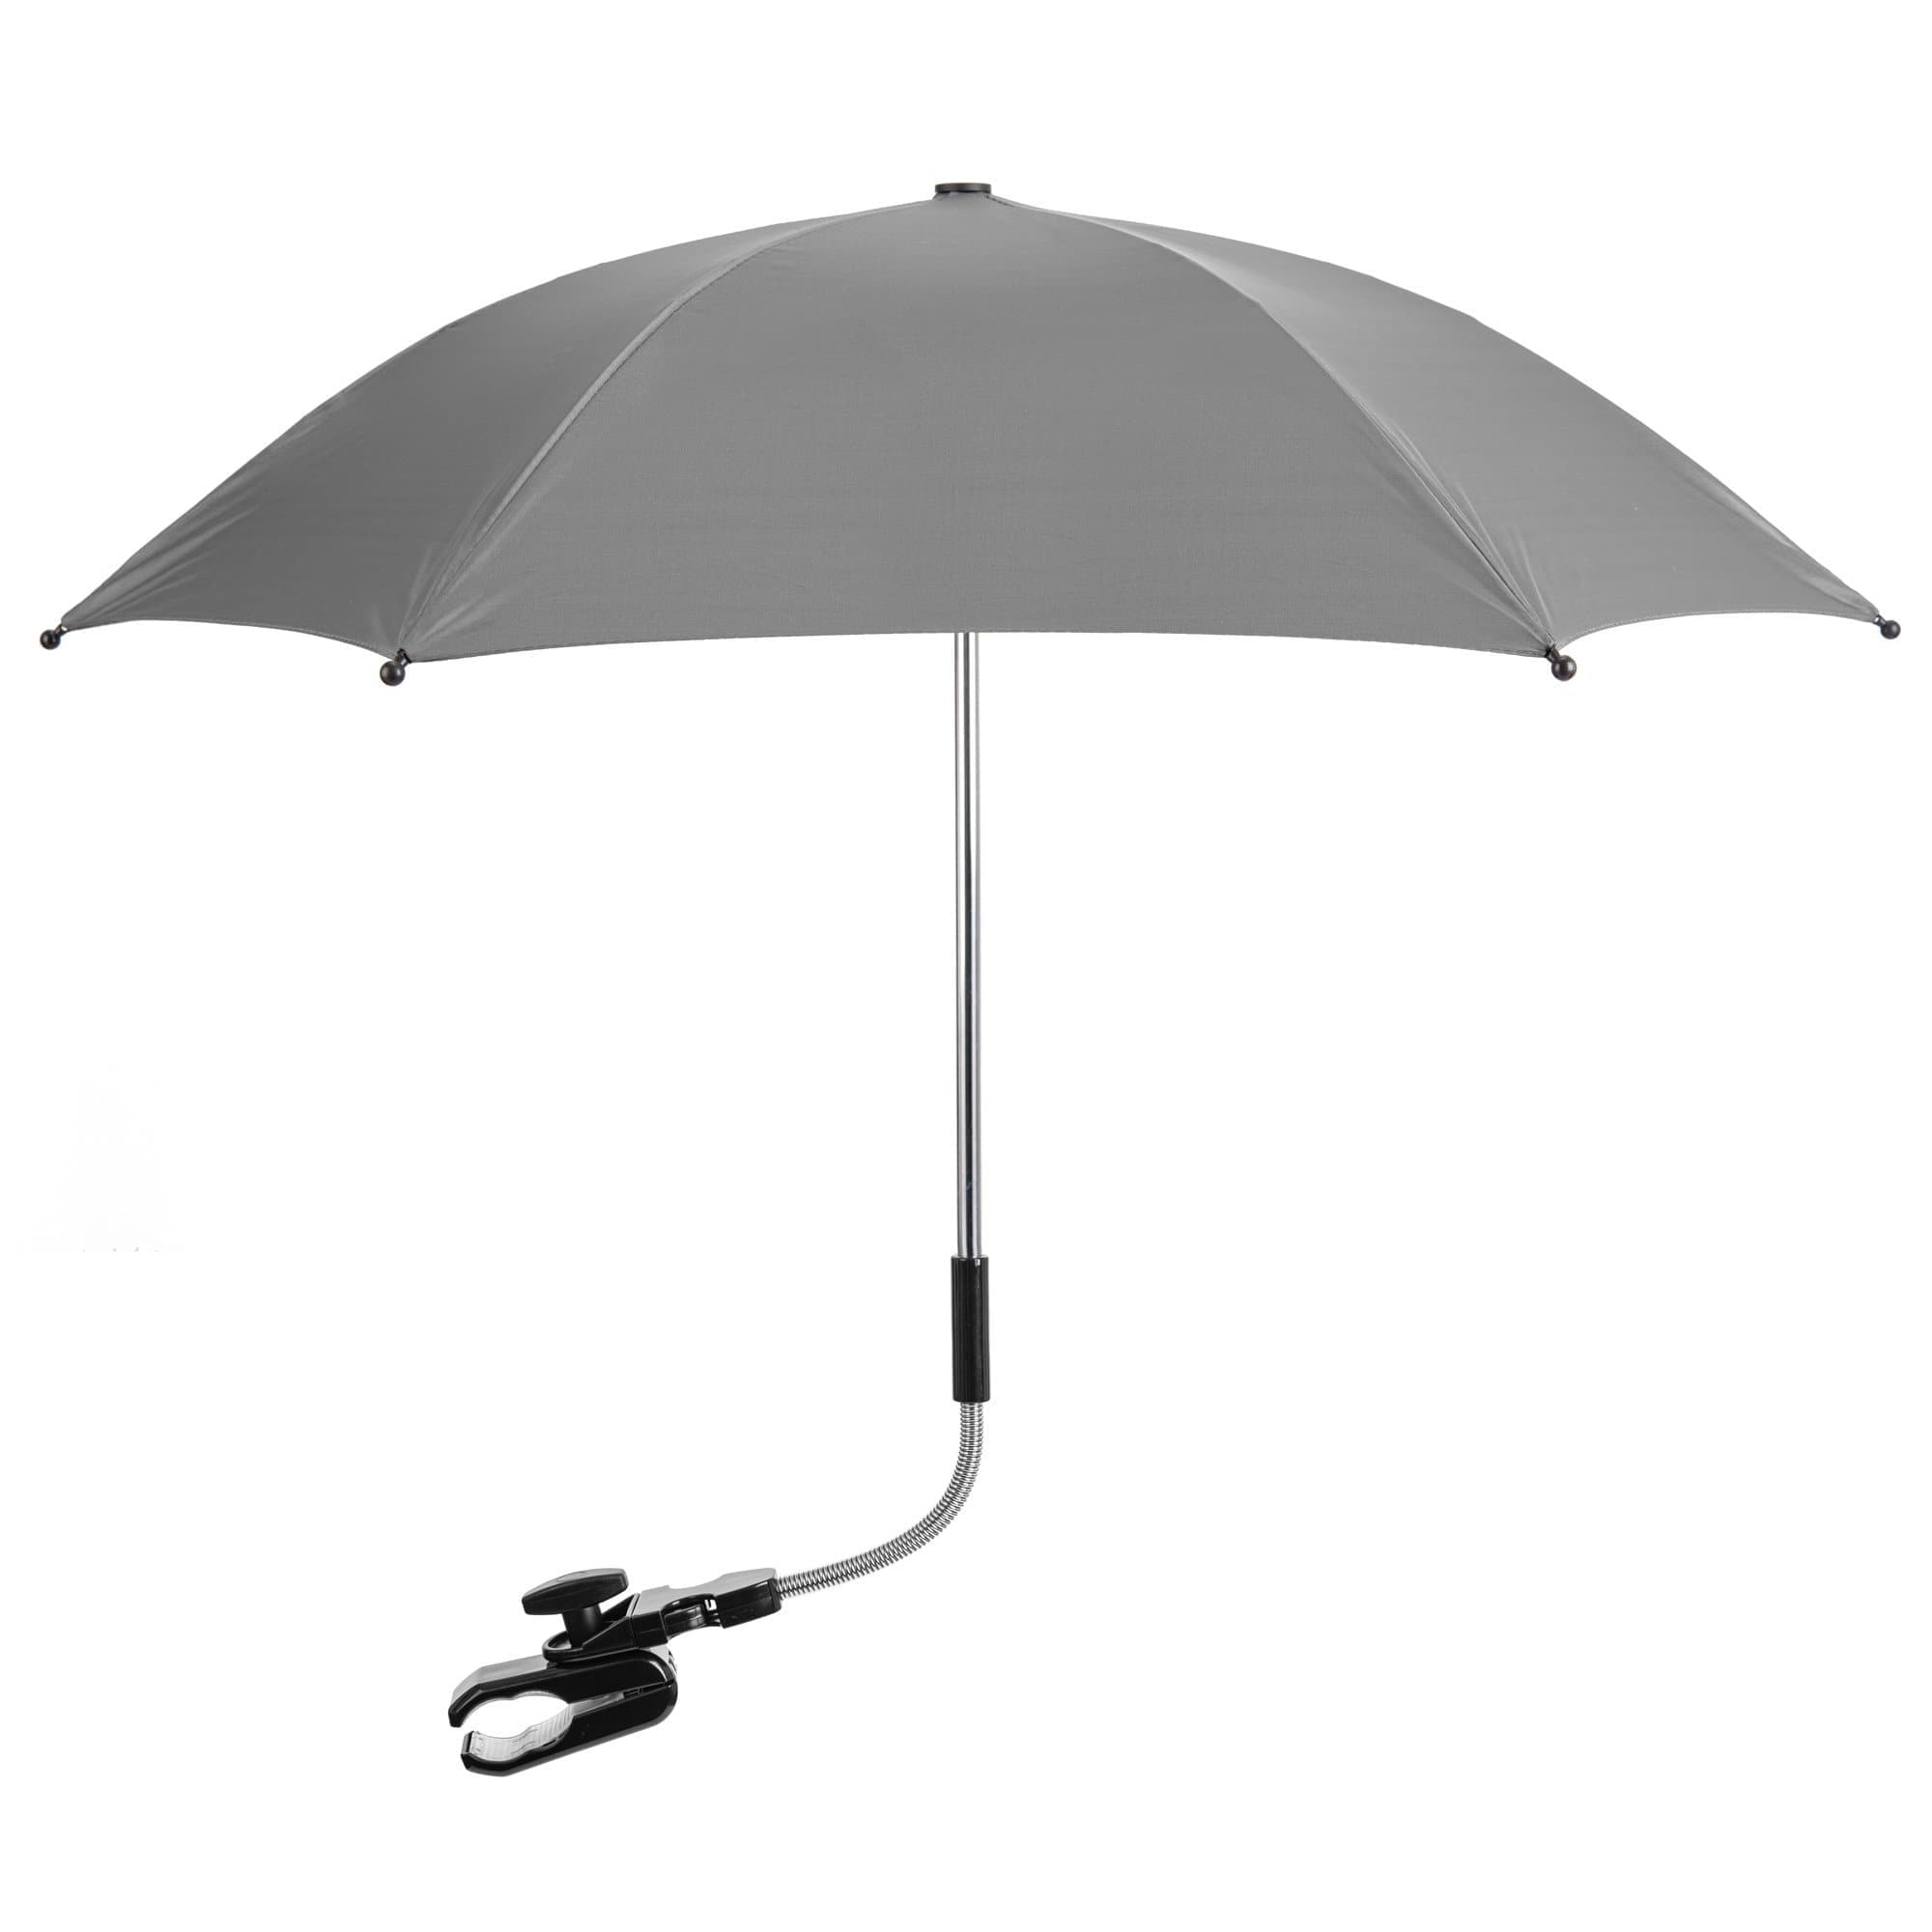 Baby Parasol Compatible With Koelstra - Fits All Models - For Your Little One